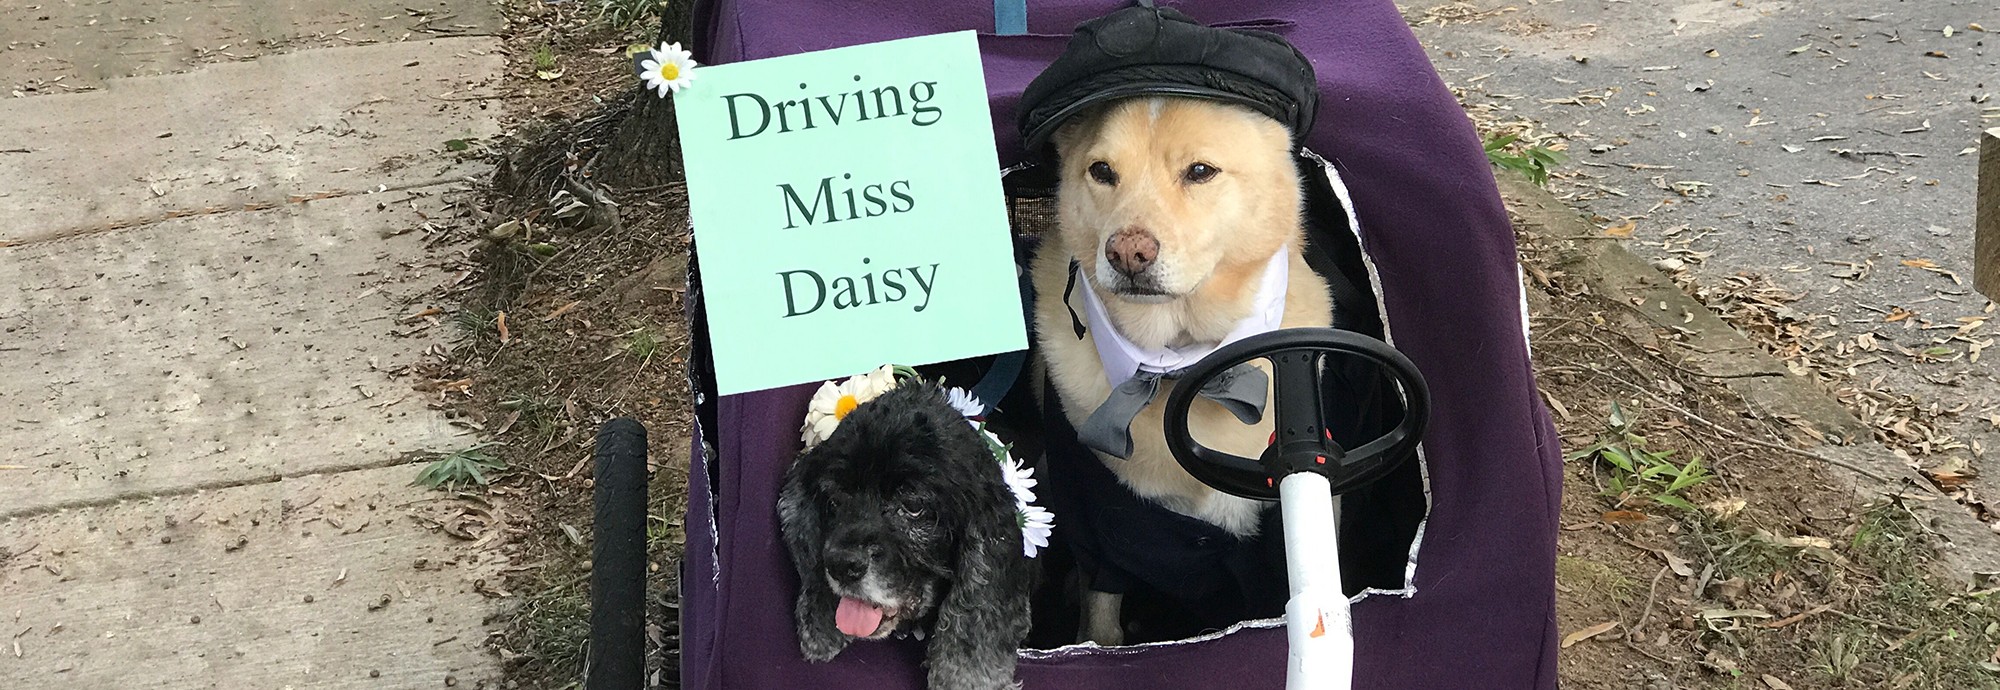 Raven's two dogs, Bohdi and Lil Bit, in costume, white dog in chauffeur's hat in the drivers seat and the black spaniel with white daisies in her hair, being driven. sign: driving miss daisy